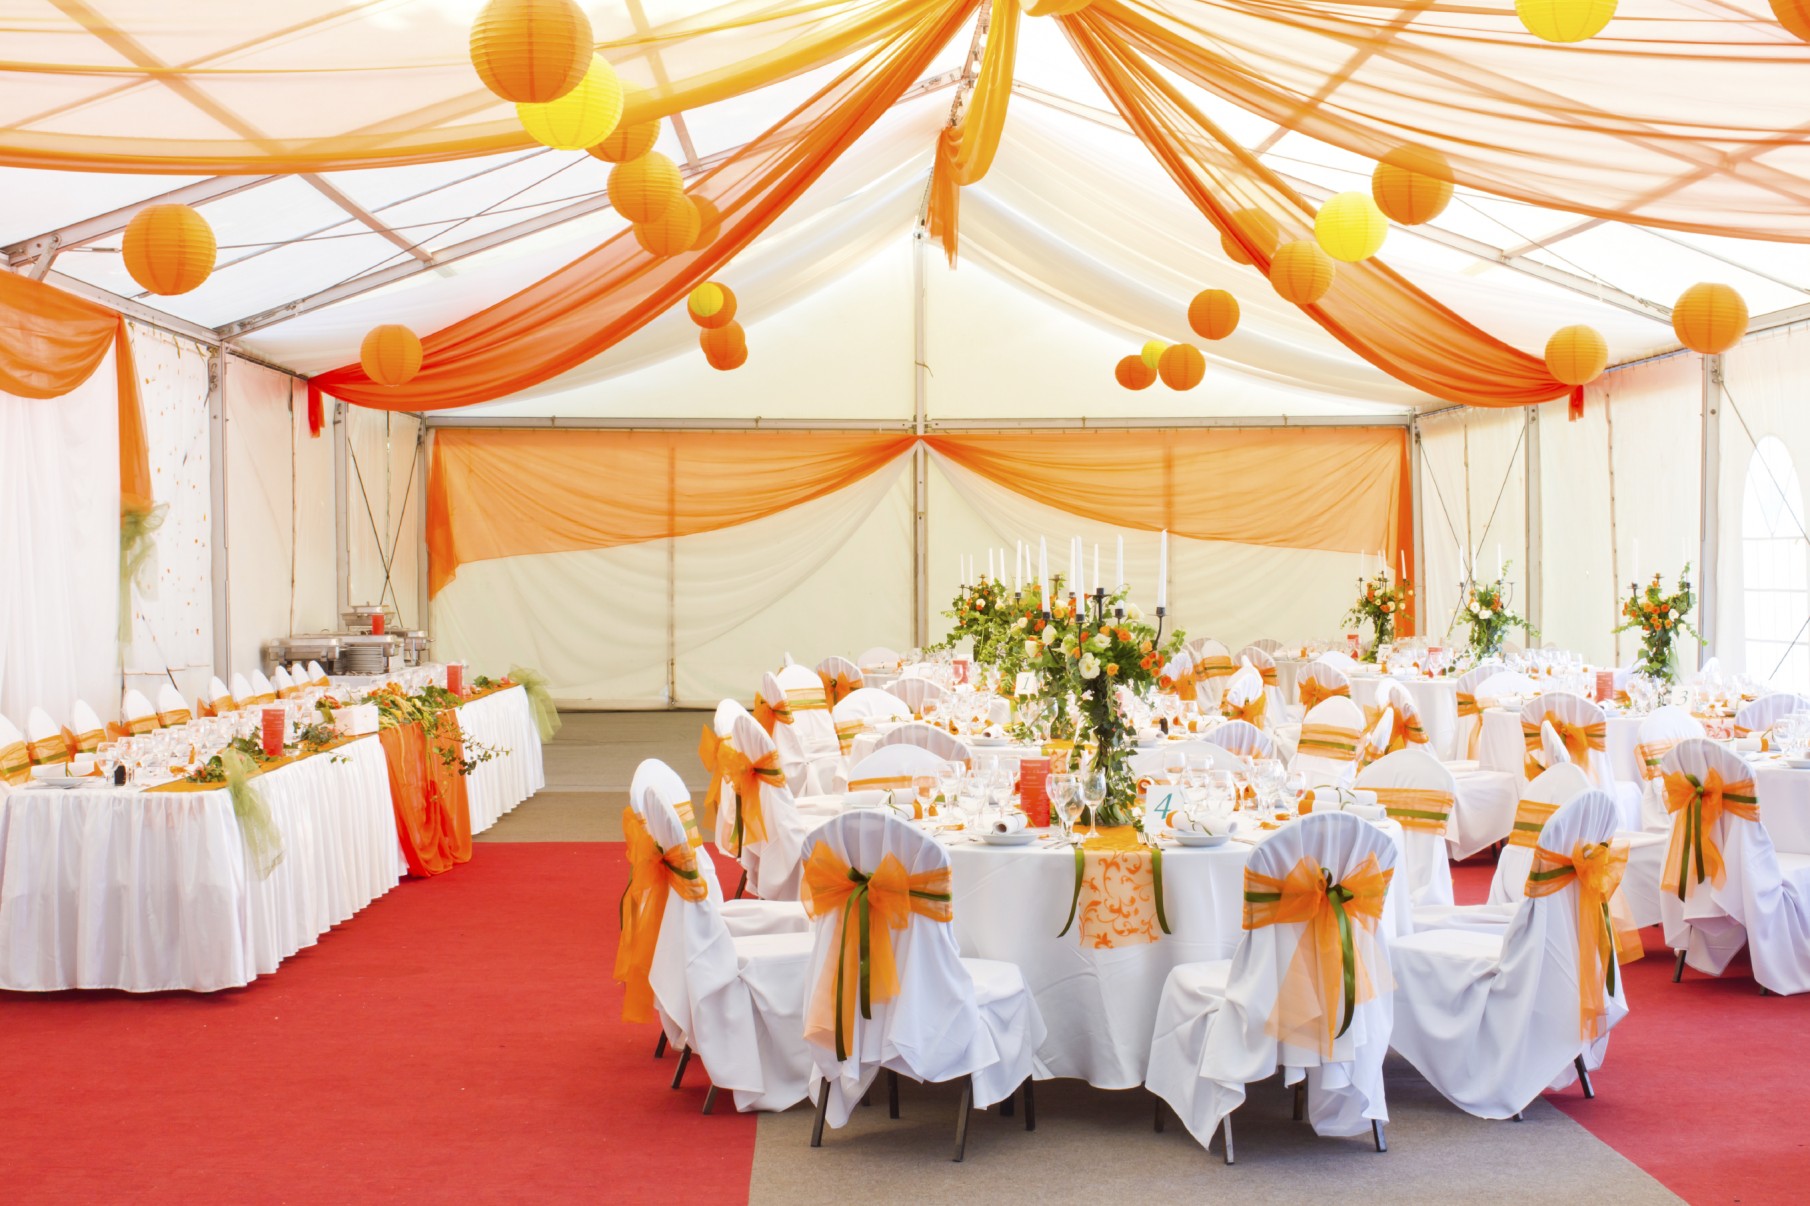 Three Things To Keep in Mind When Planning Your Tent Wedding